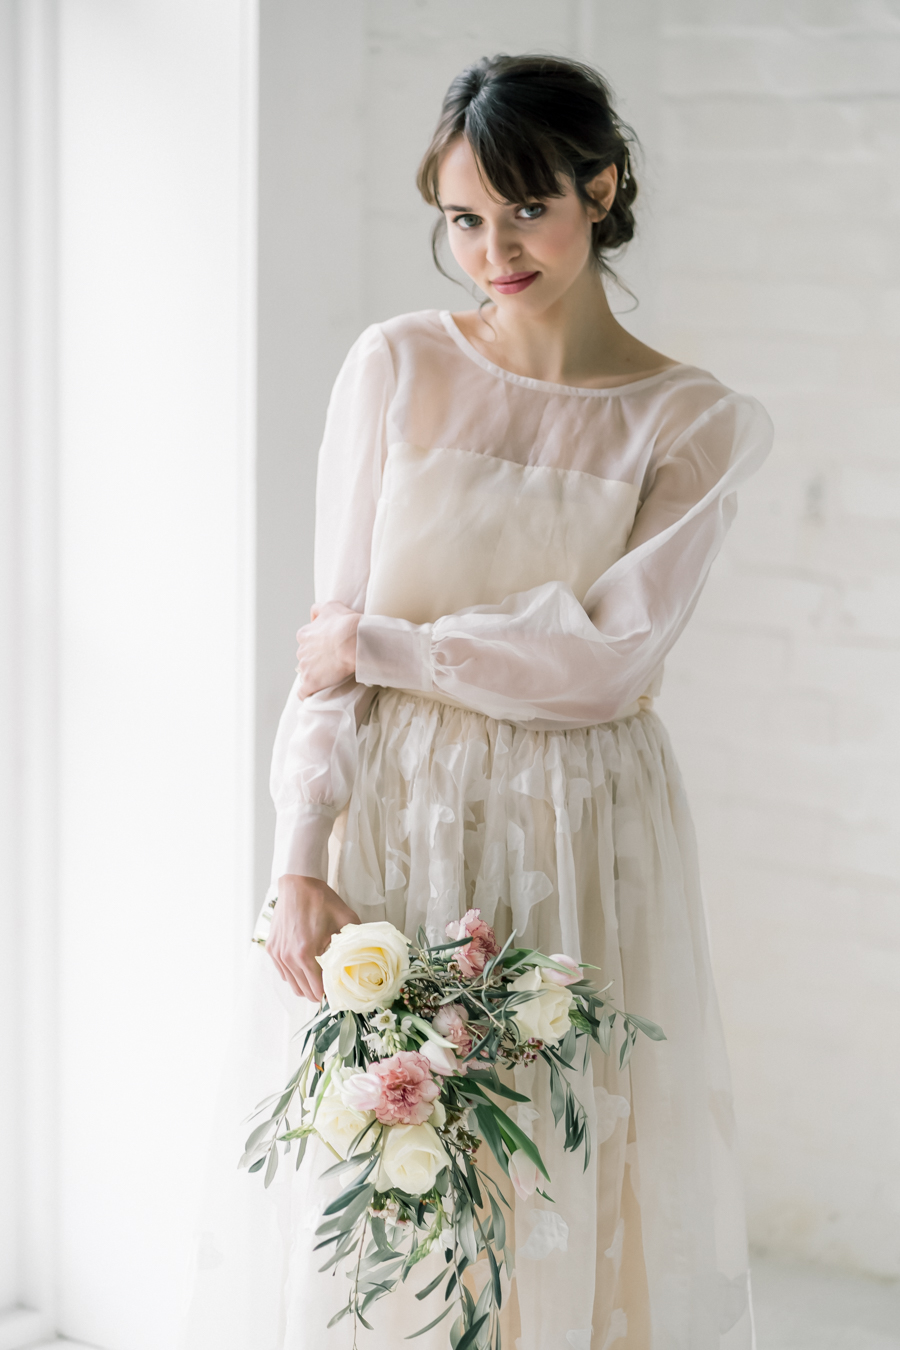 Spring blossom wedding style inspiration and ideas with Chloe Ely Photography at Barton Court (27)